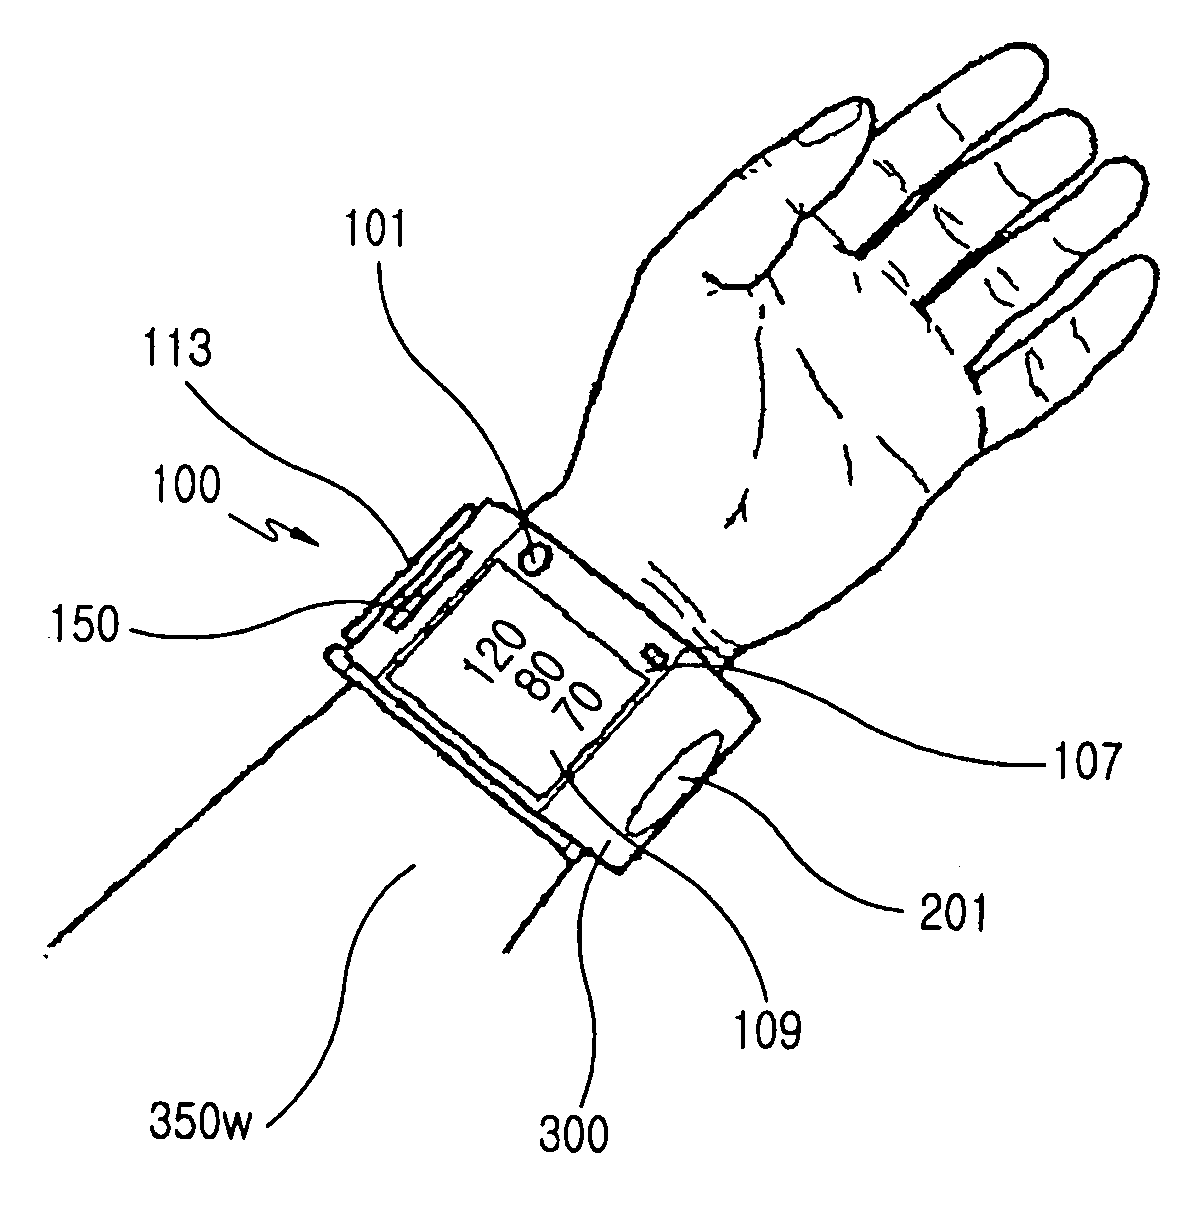 Method and apparatus for cufflessly and non-invasively measuring wrist blood pressure in association with communication device